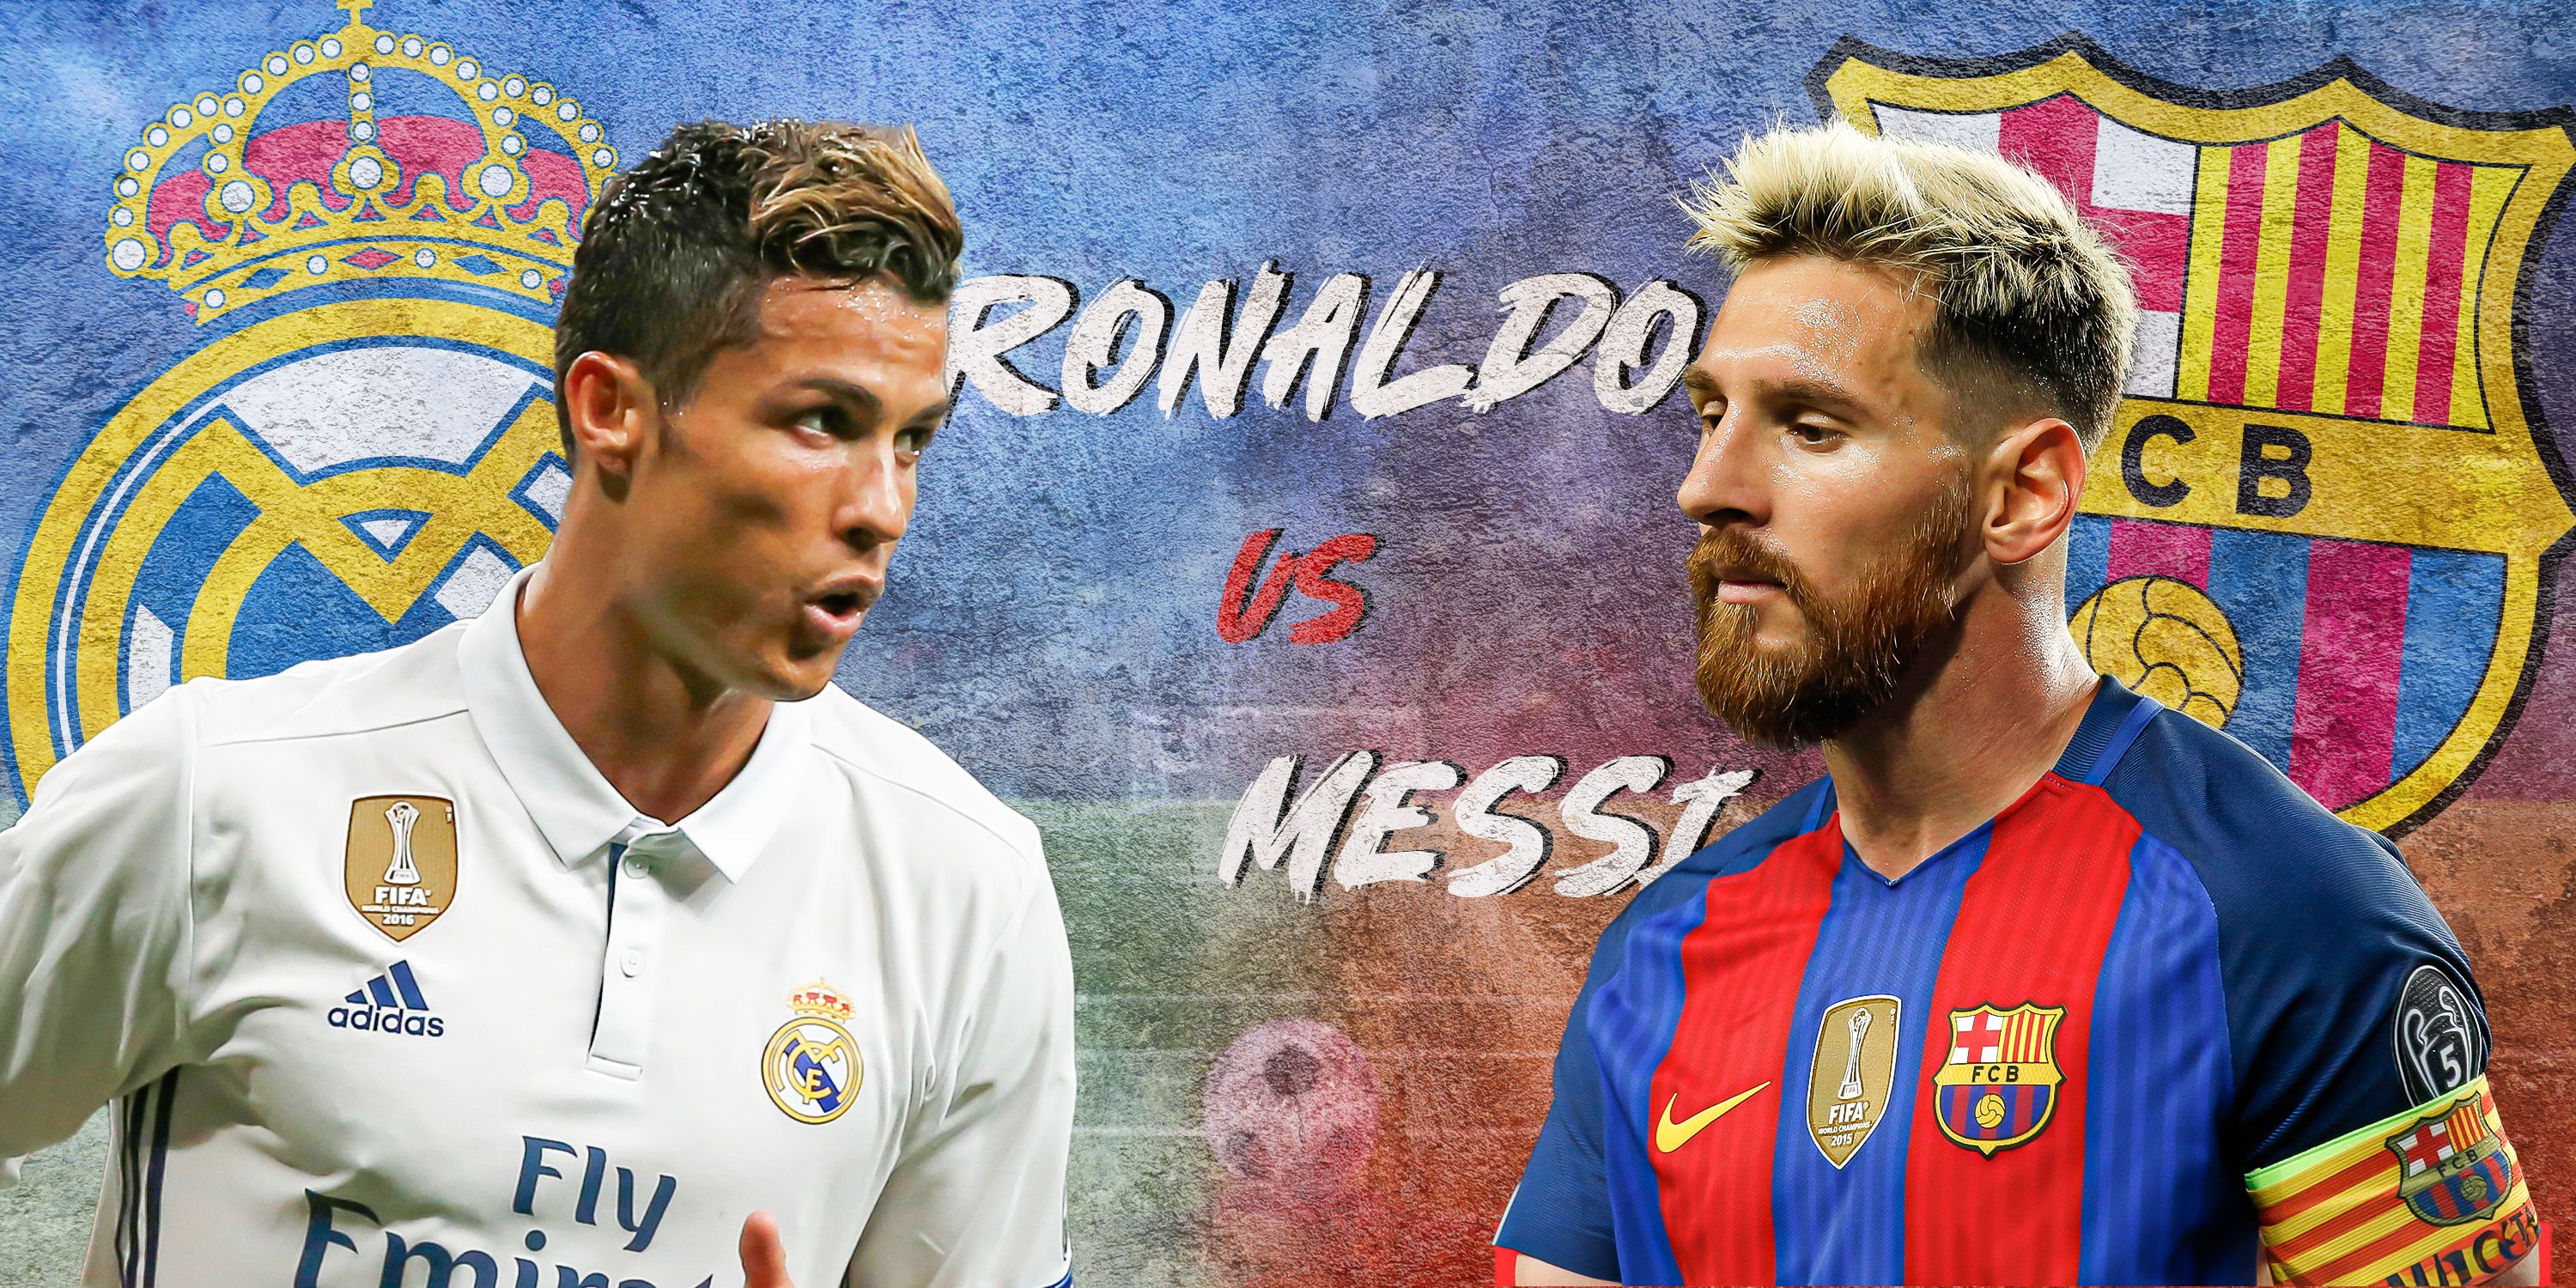 Cristiano Ronalo and Lionel Messi for Real Madrid and Barcelona facing off.